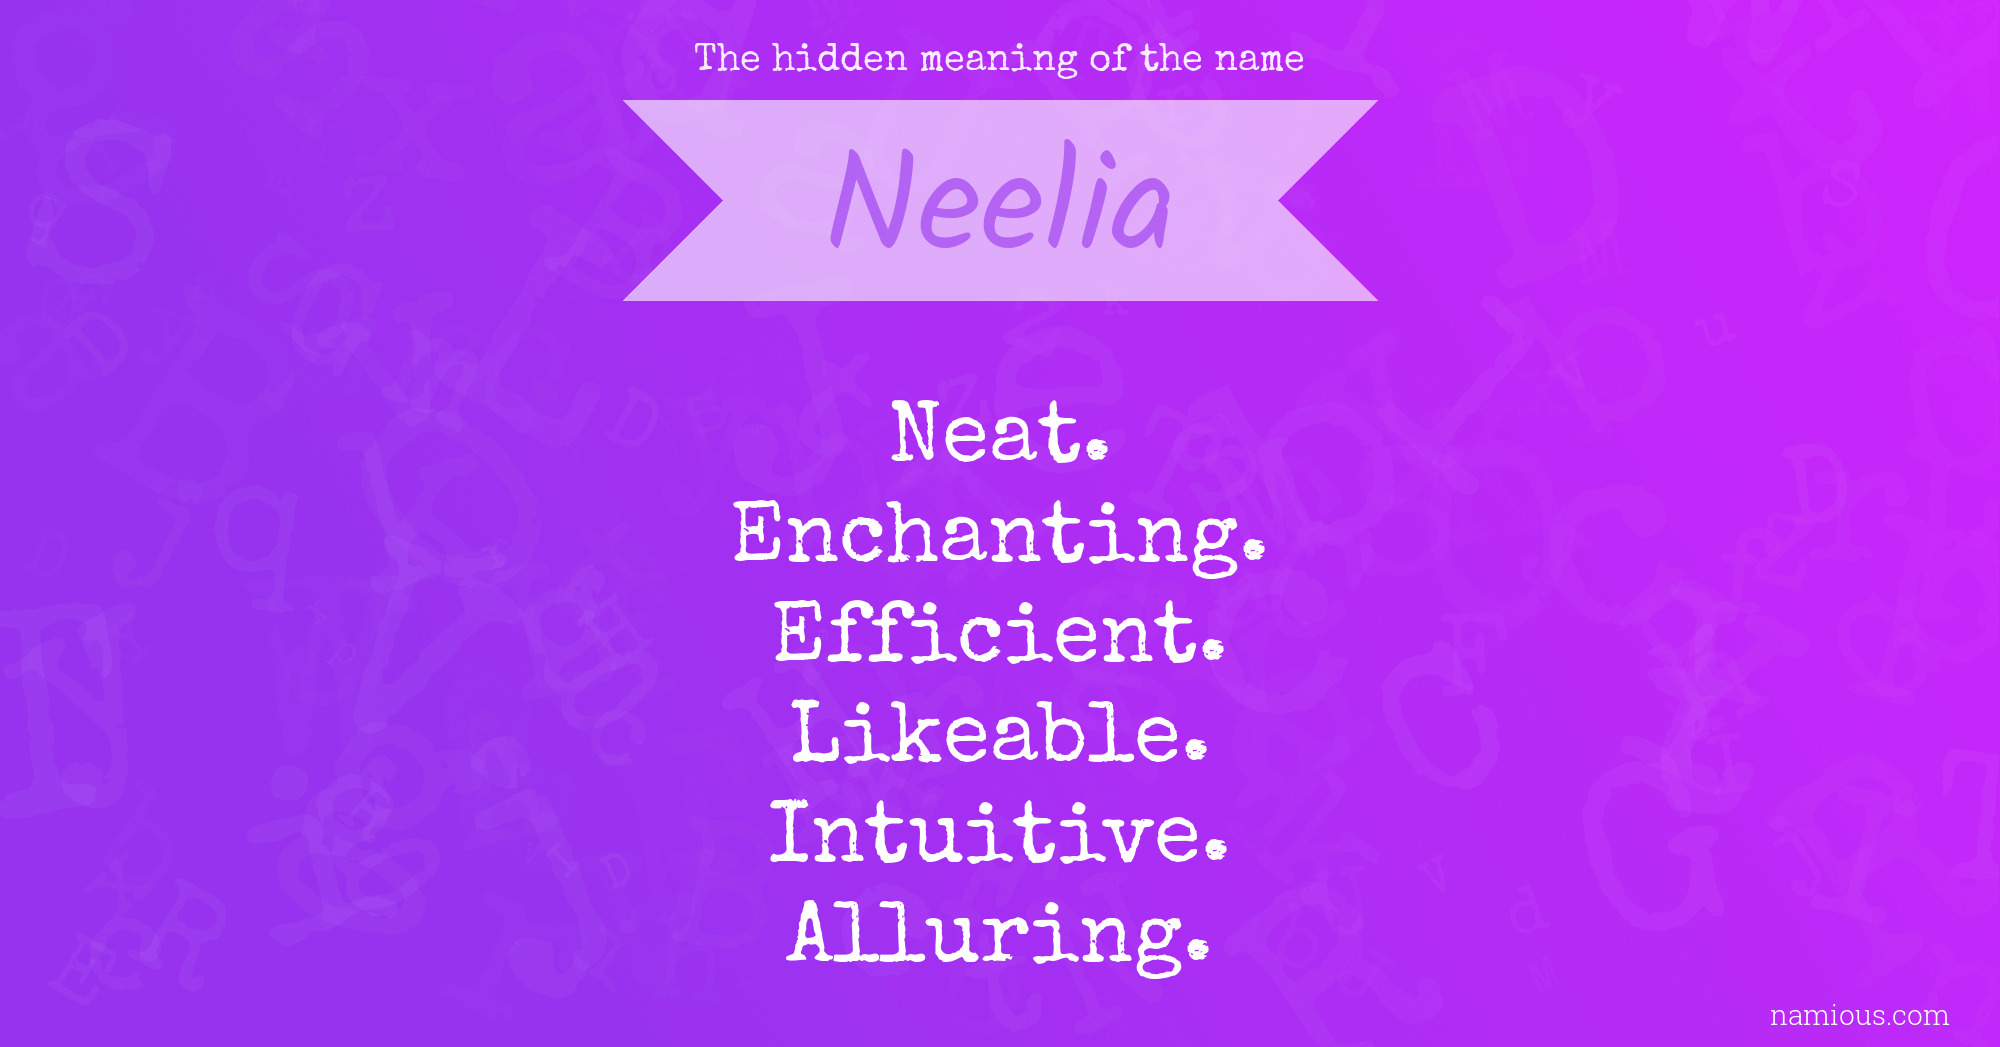 The hidden meaning of the name Neelia